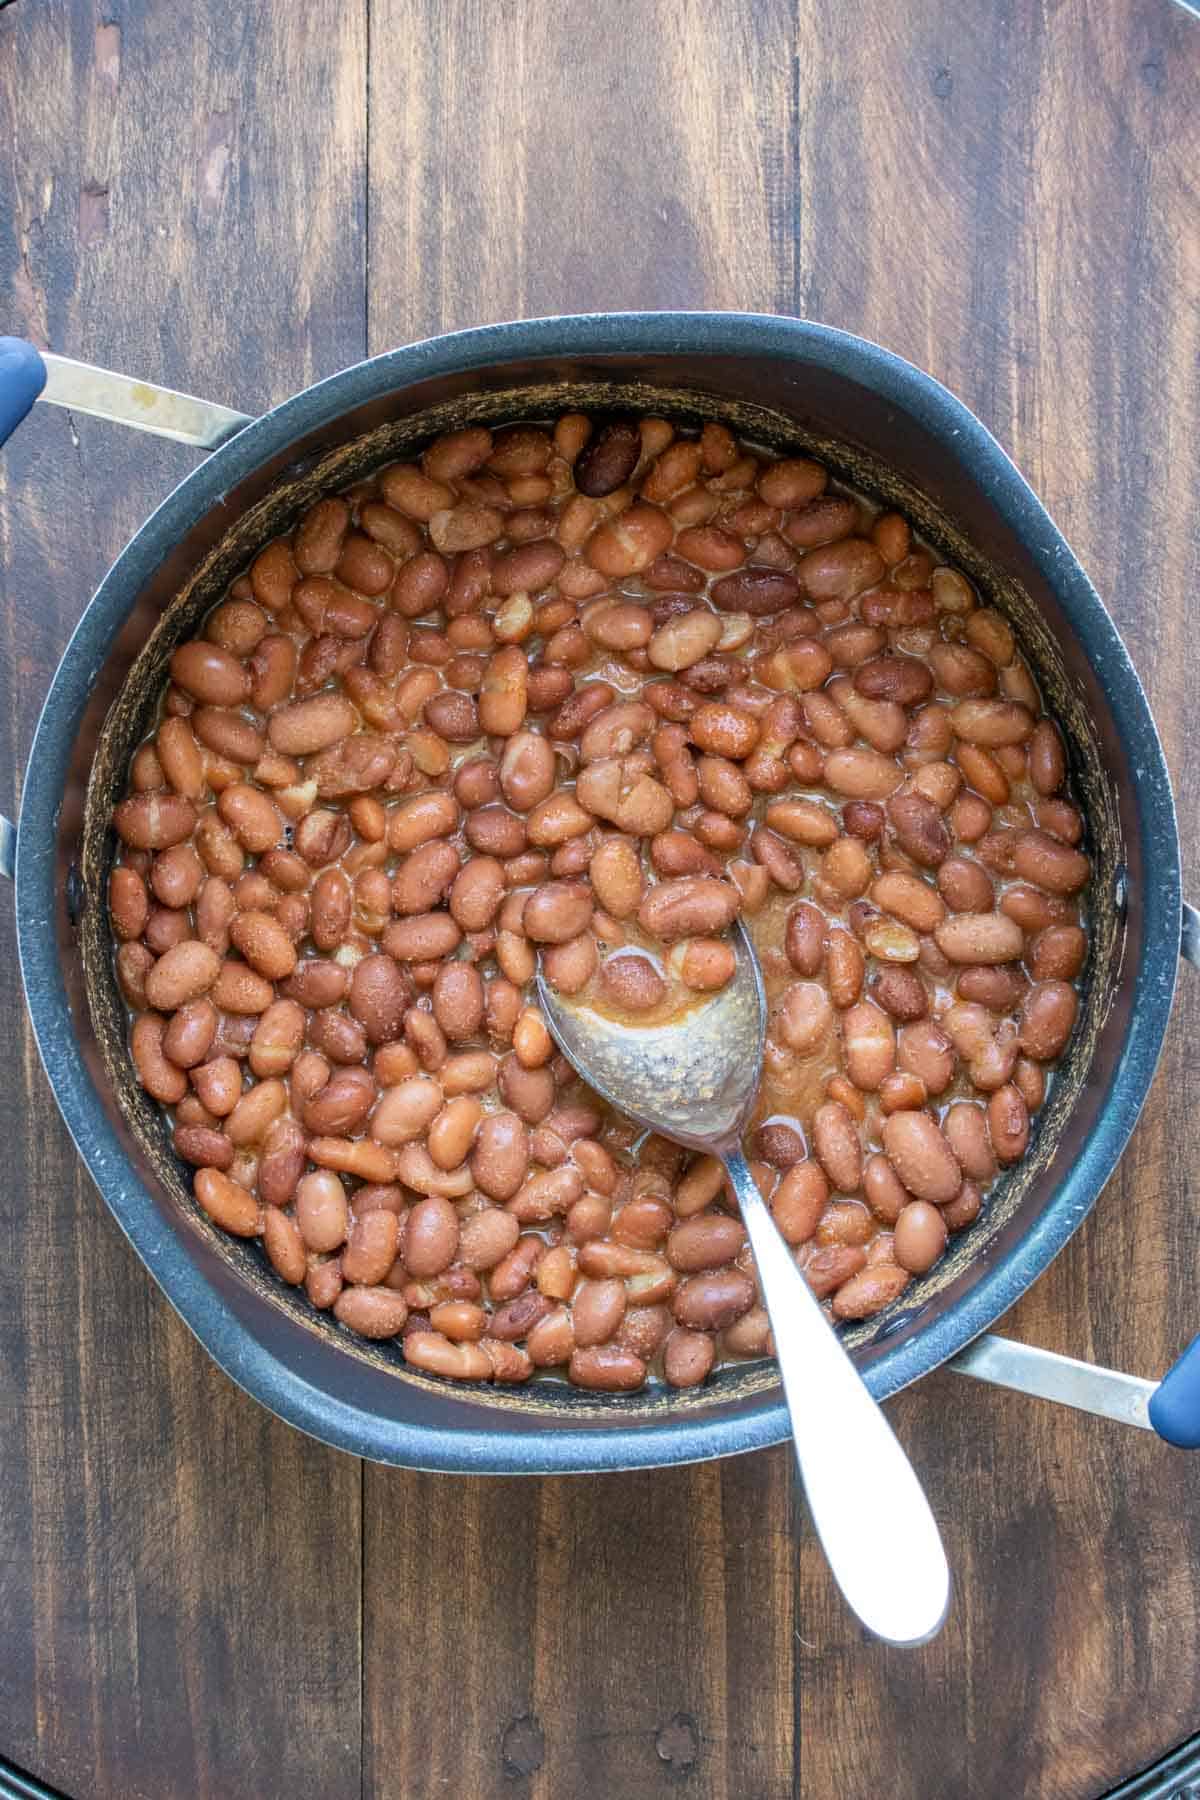 A pot with beans inside being mixed by a metal spoon